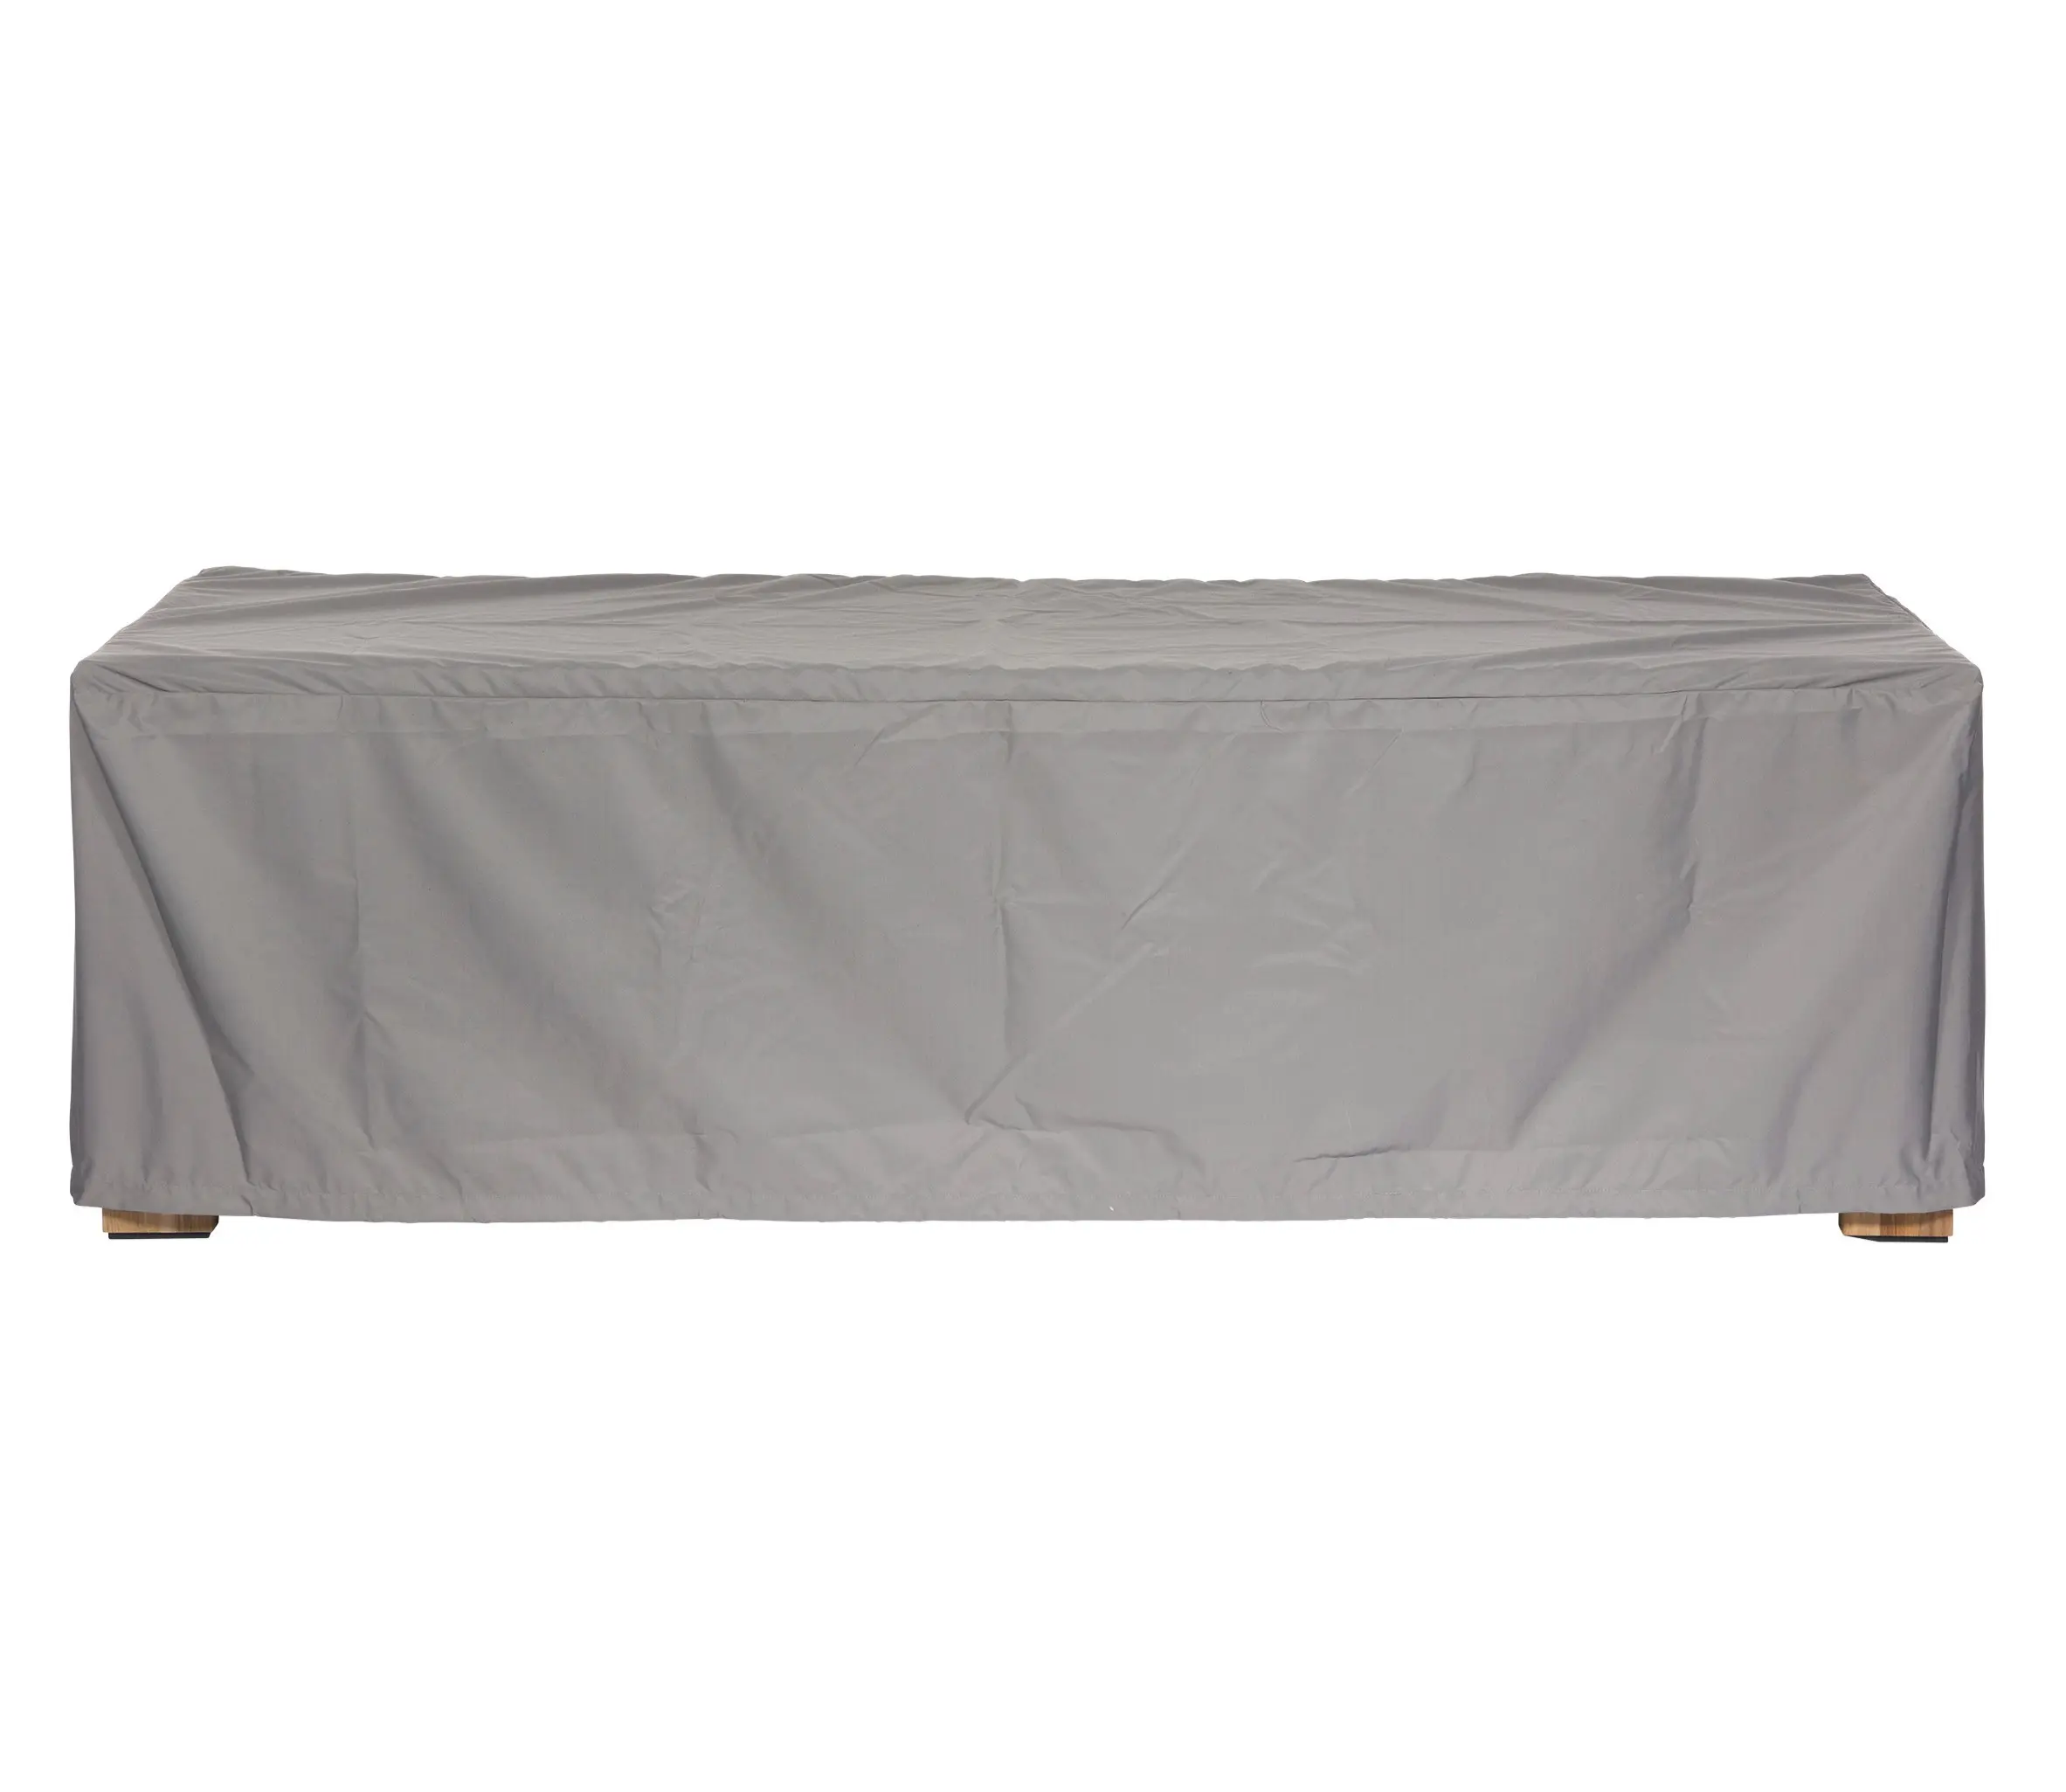 Barlow Tyrie Table Covers